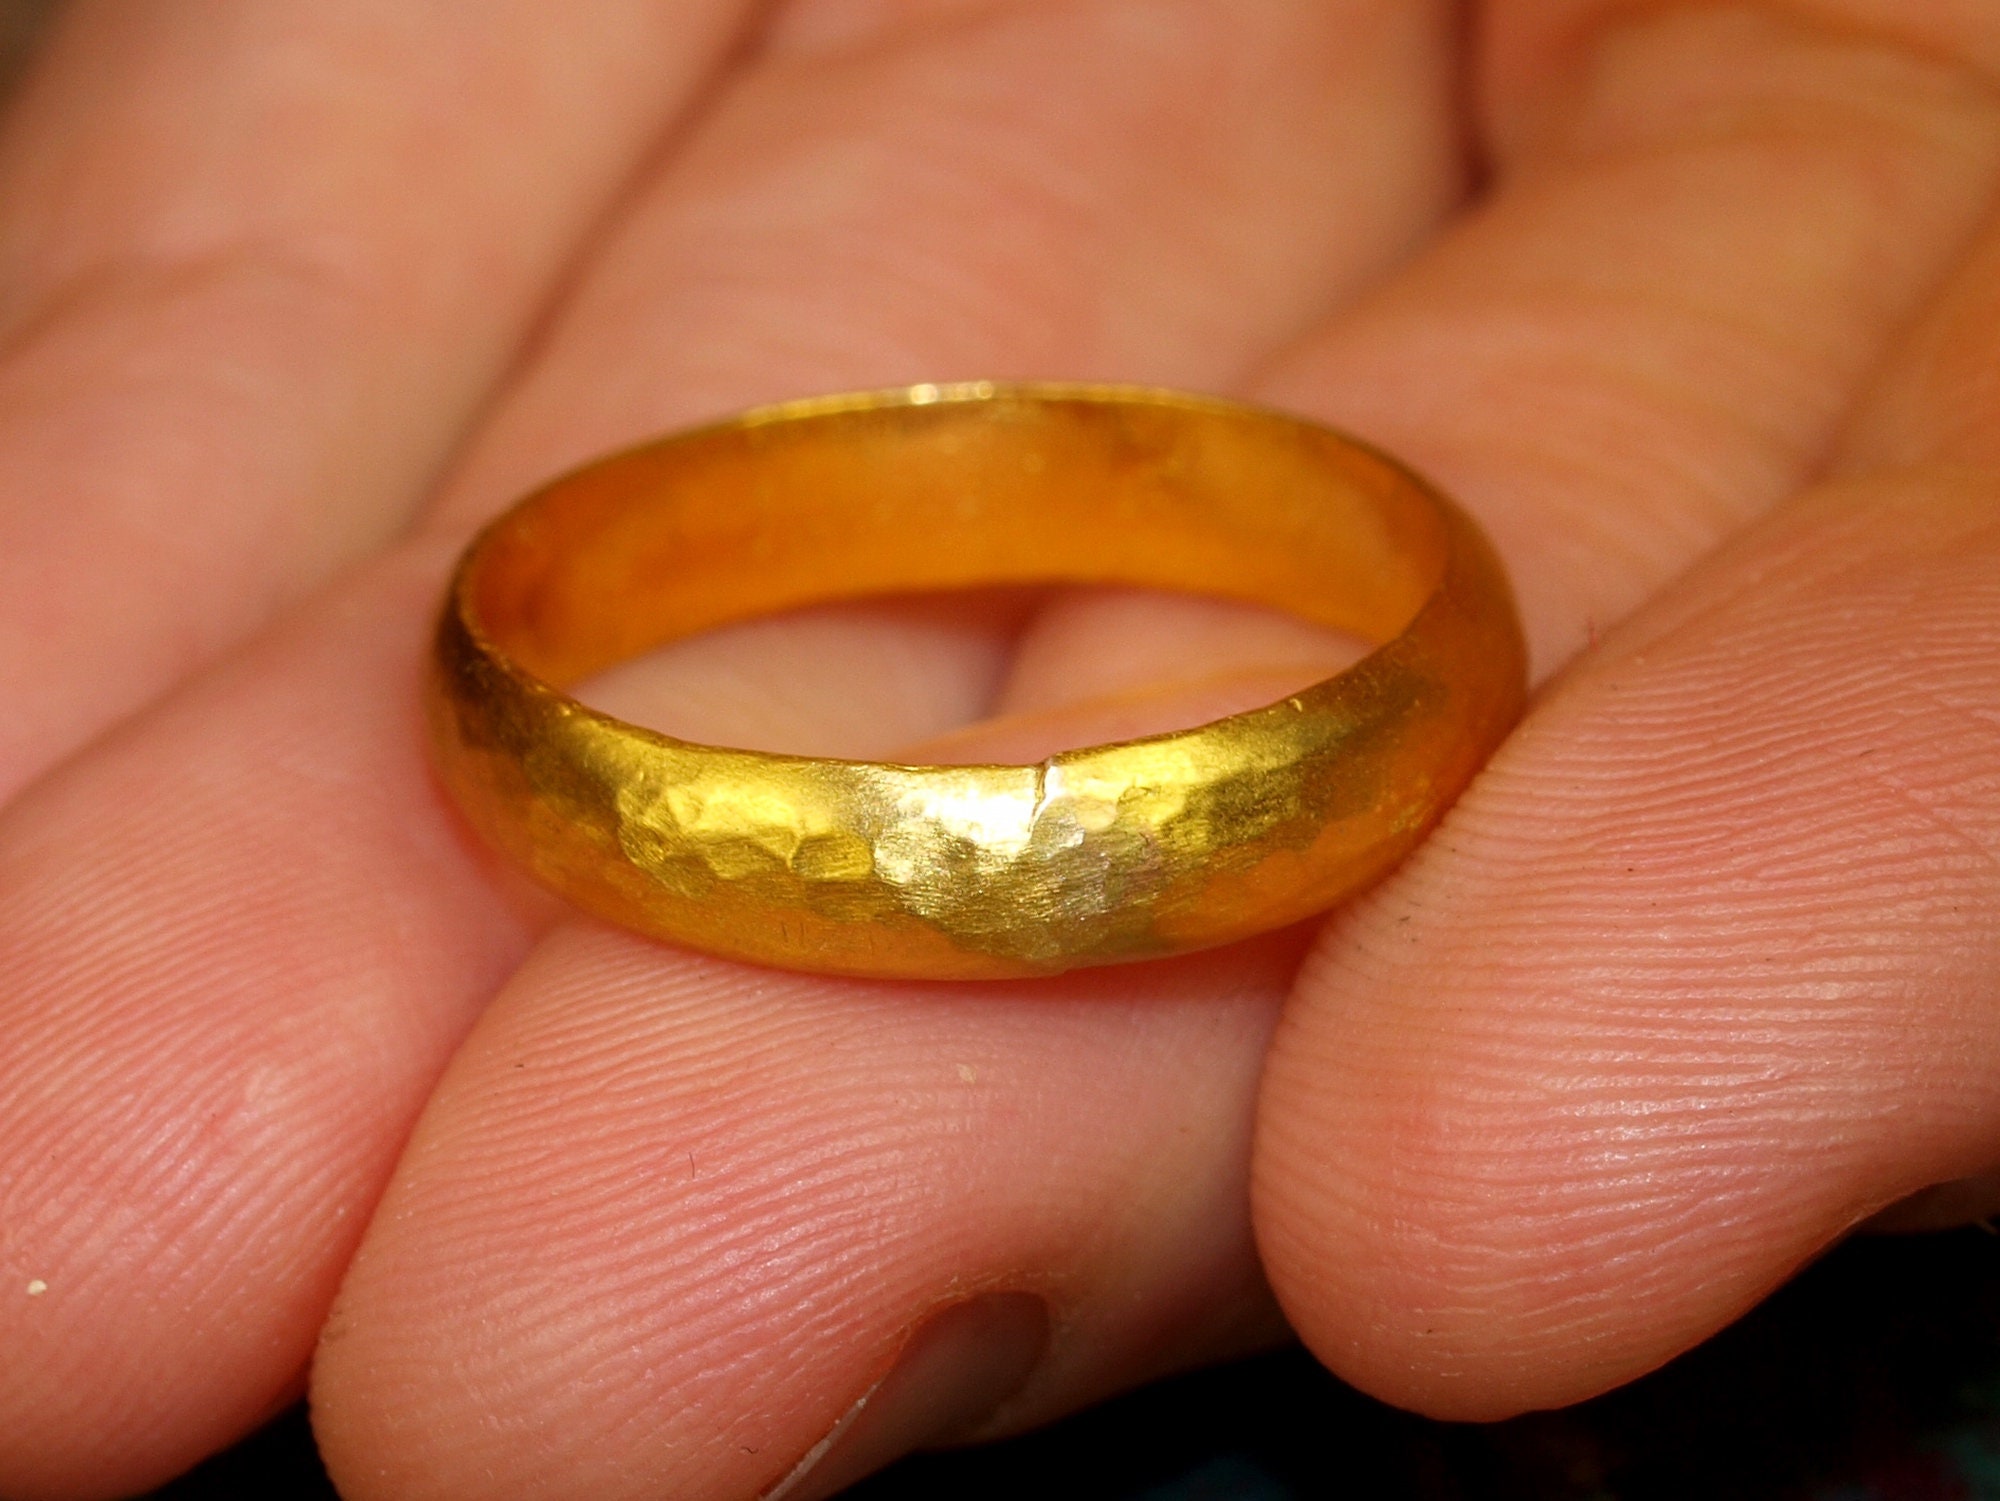 Gold Ring - Modern Crossover **Matte Finish** - 7.3 Grams, 24K Pure - Large